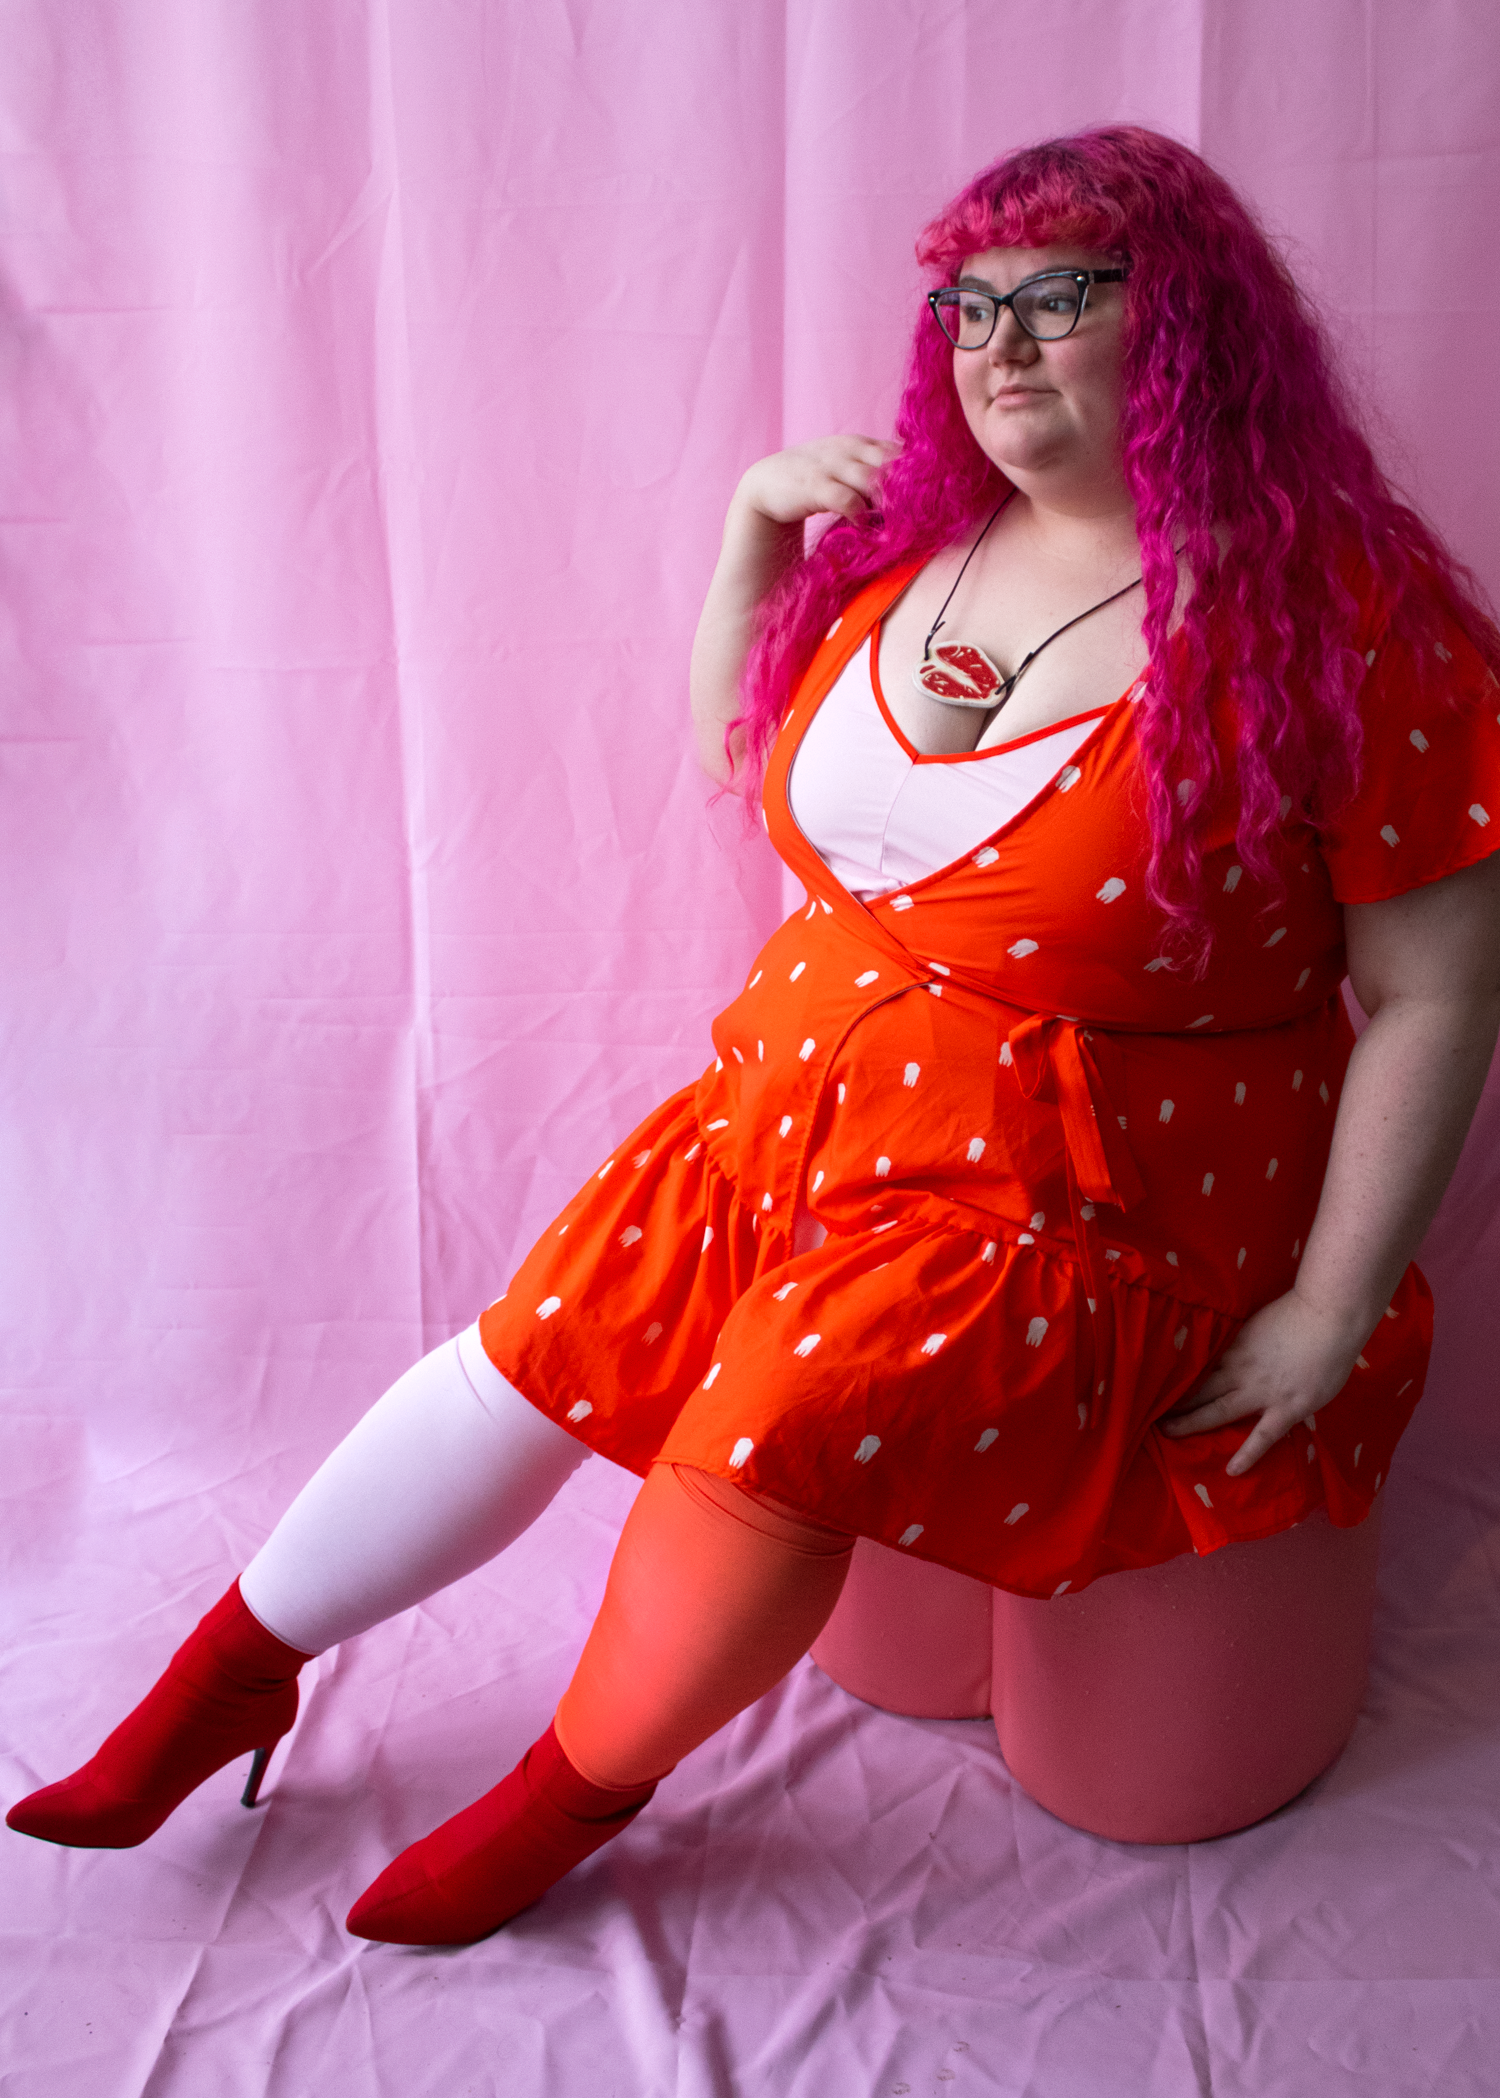 9 alt plus size clothing brands for my fat babes, by Dean Rodriguez